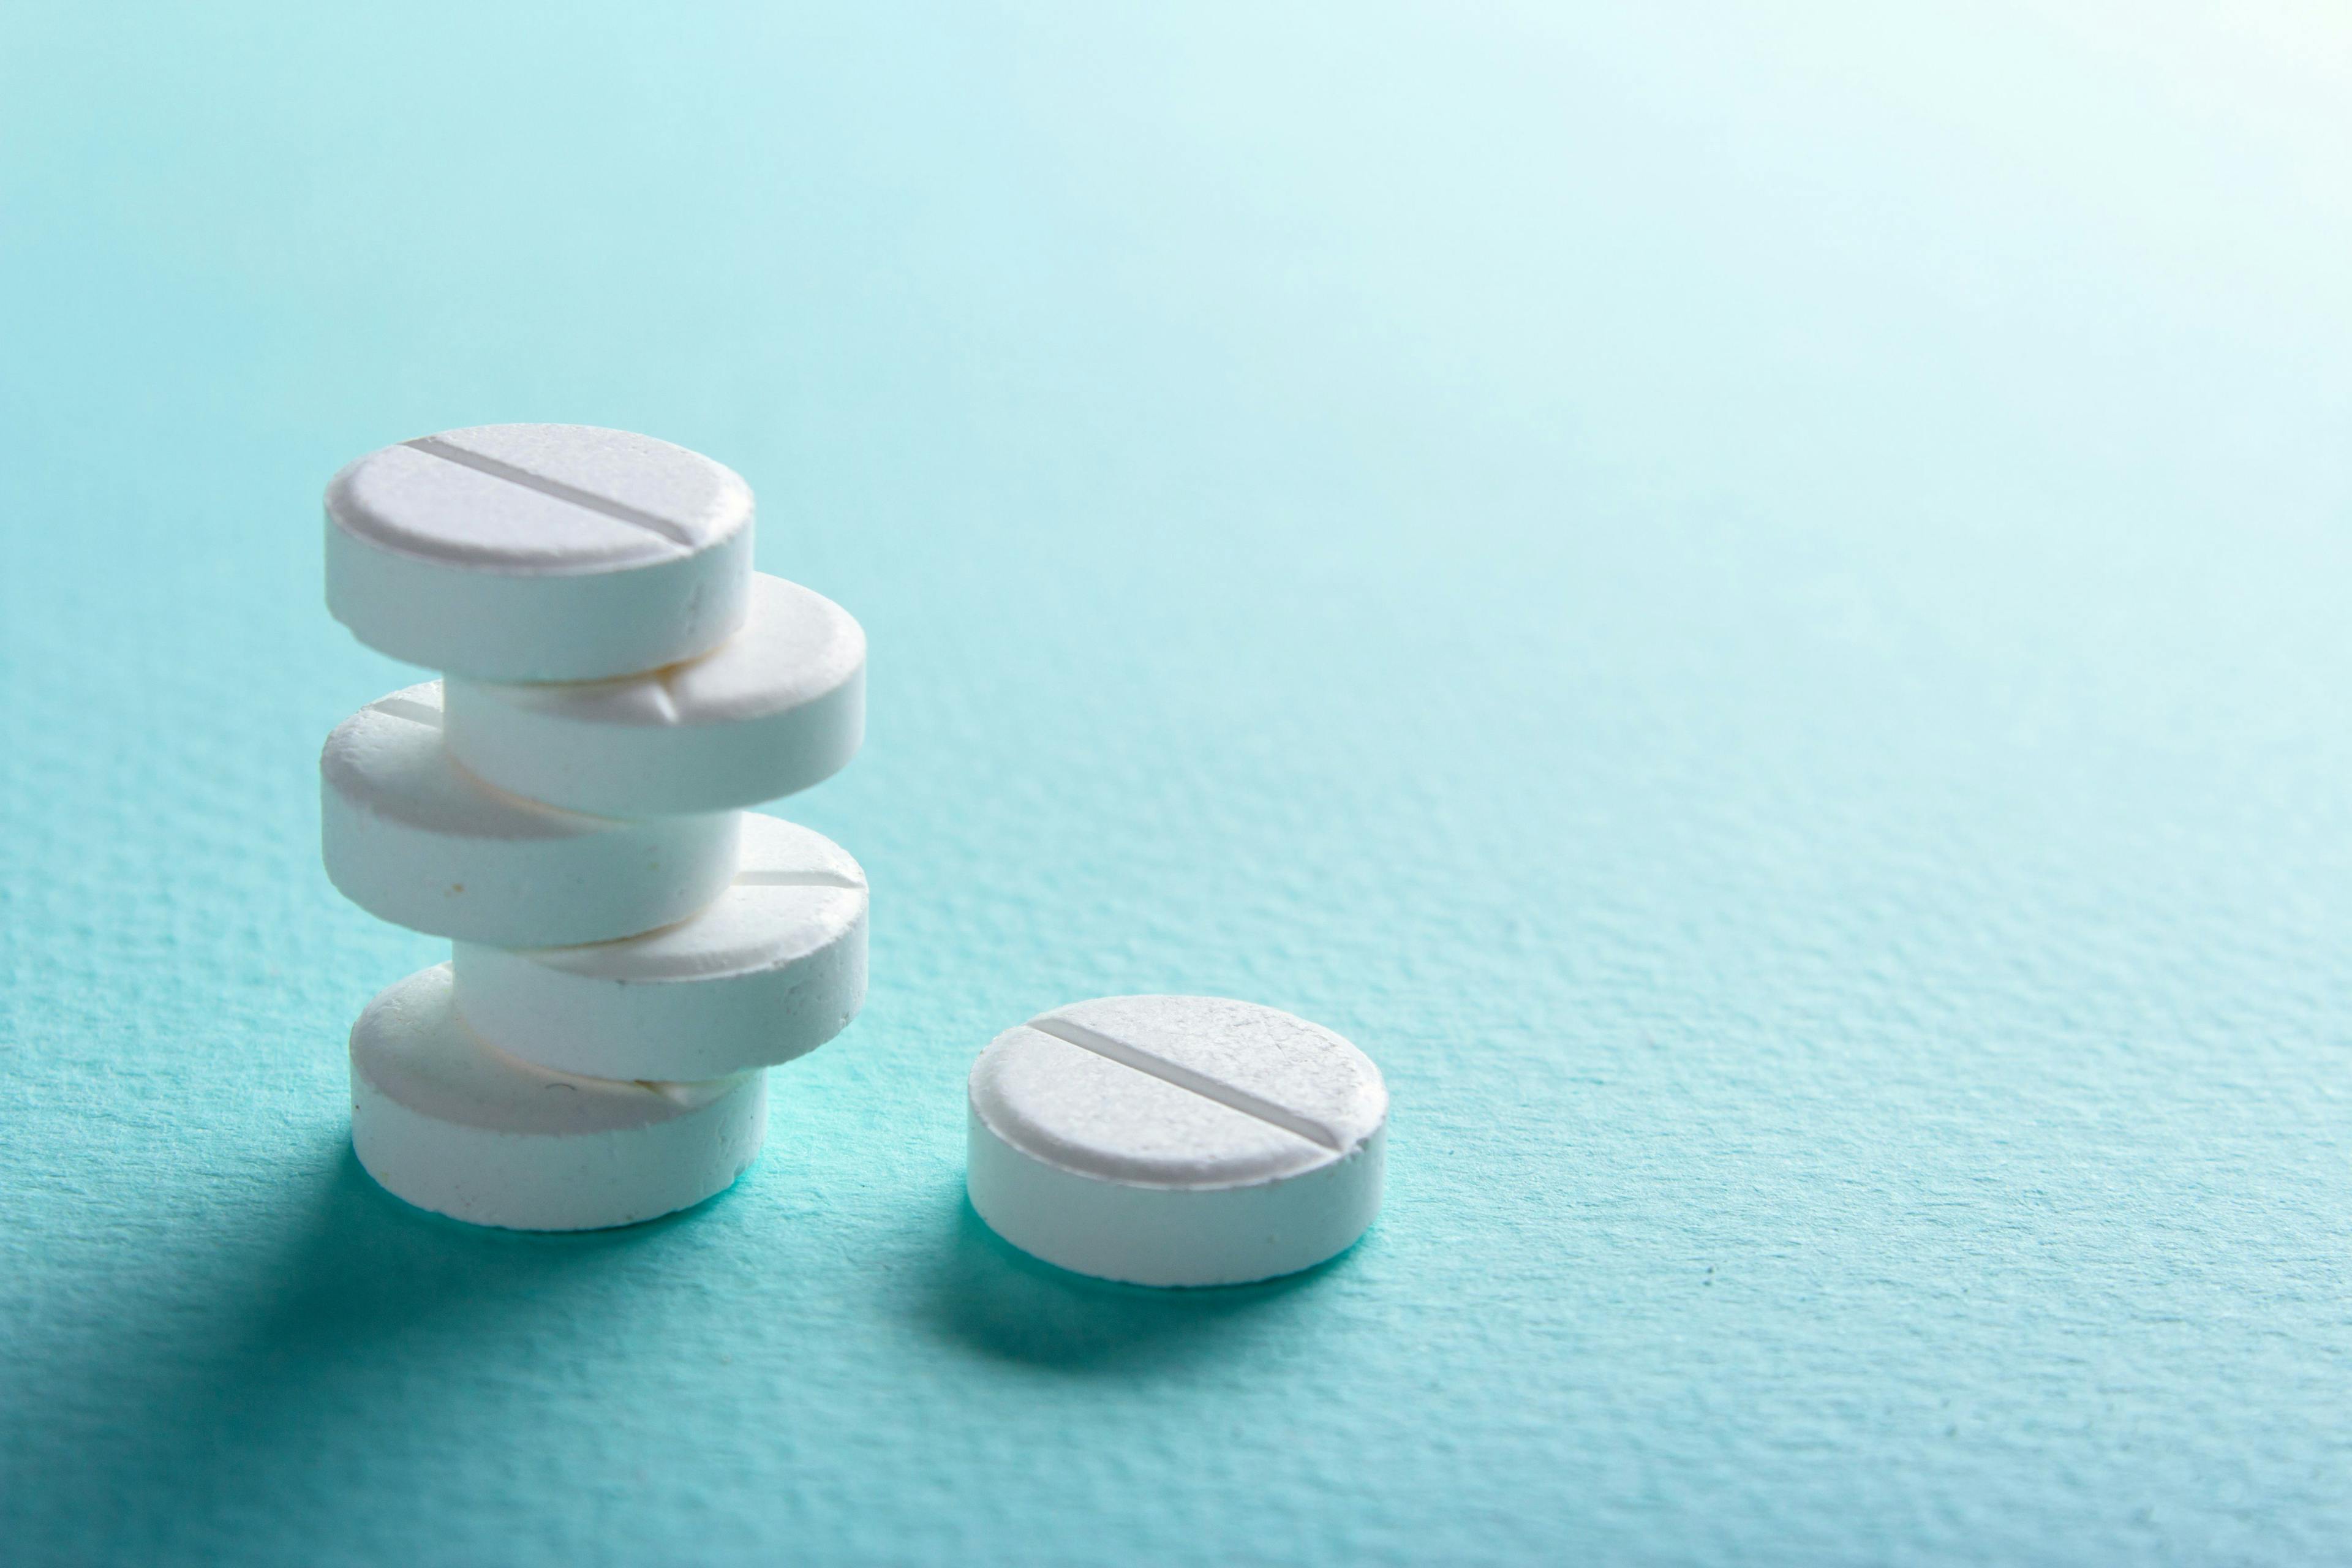 ADAPTABLE Study Finds Optimal Aspirin Dose Could Come Down to Patient Preference